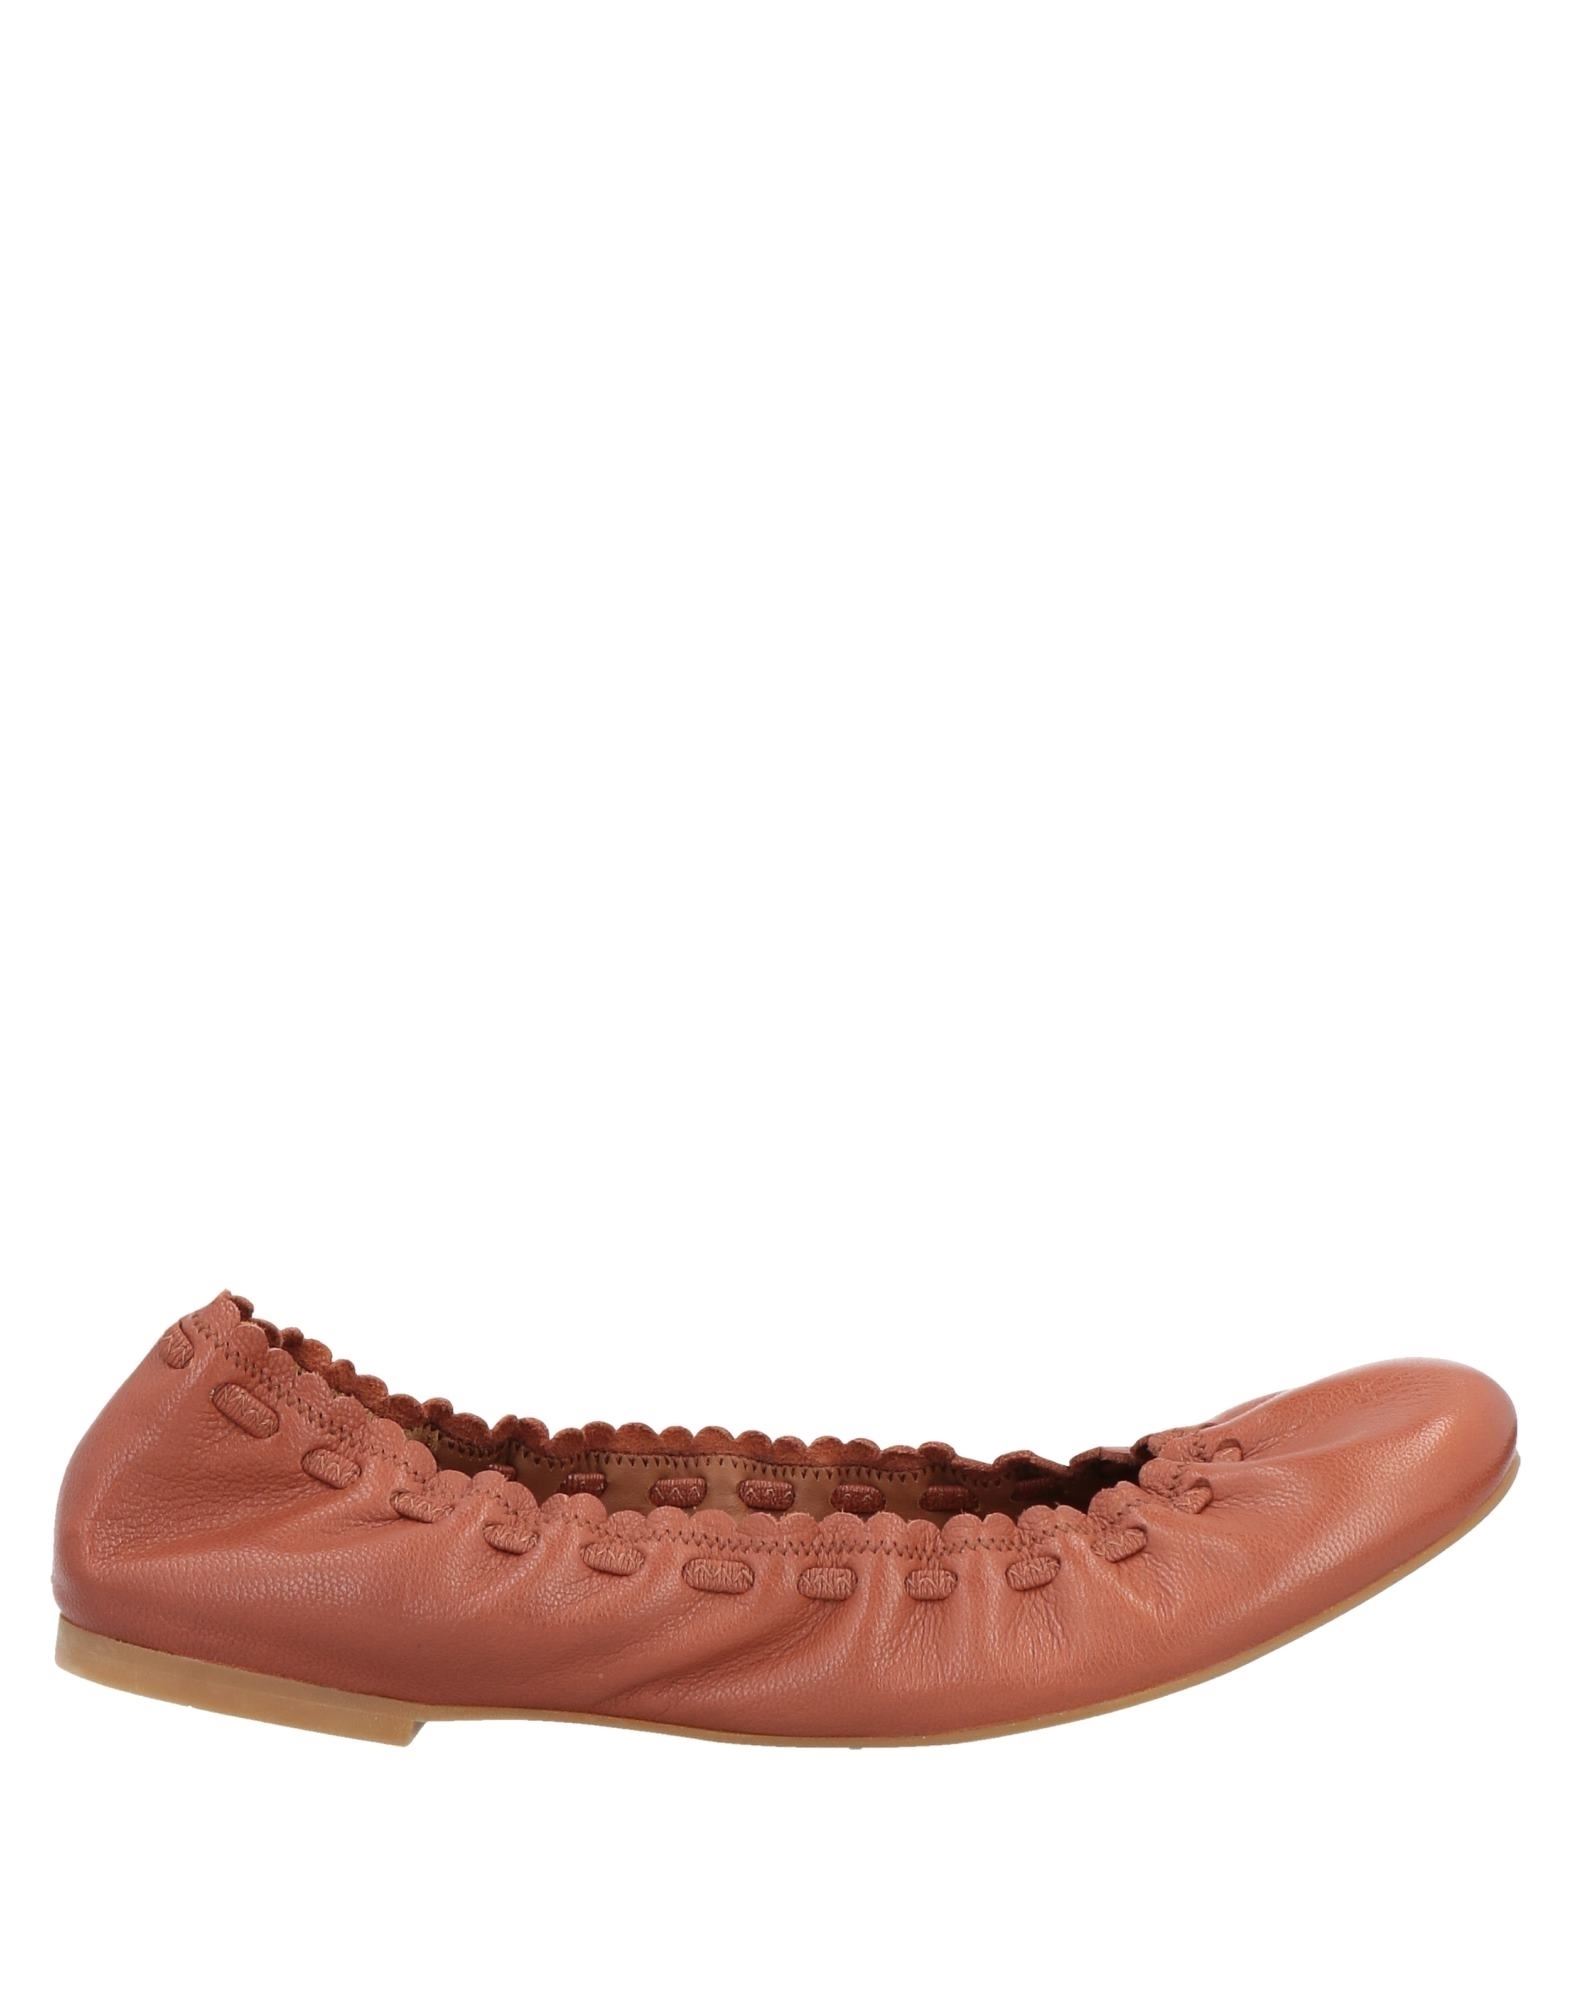 SEE BY CHLOÉ BALLET FLATS